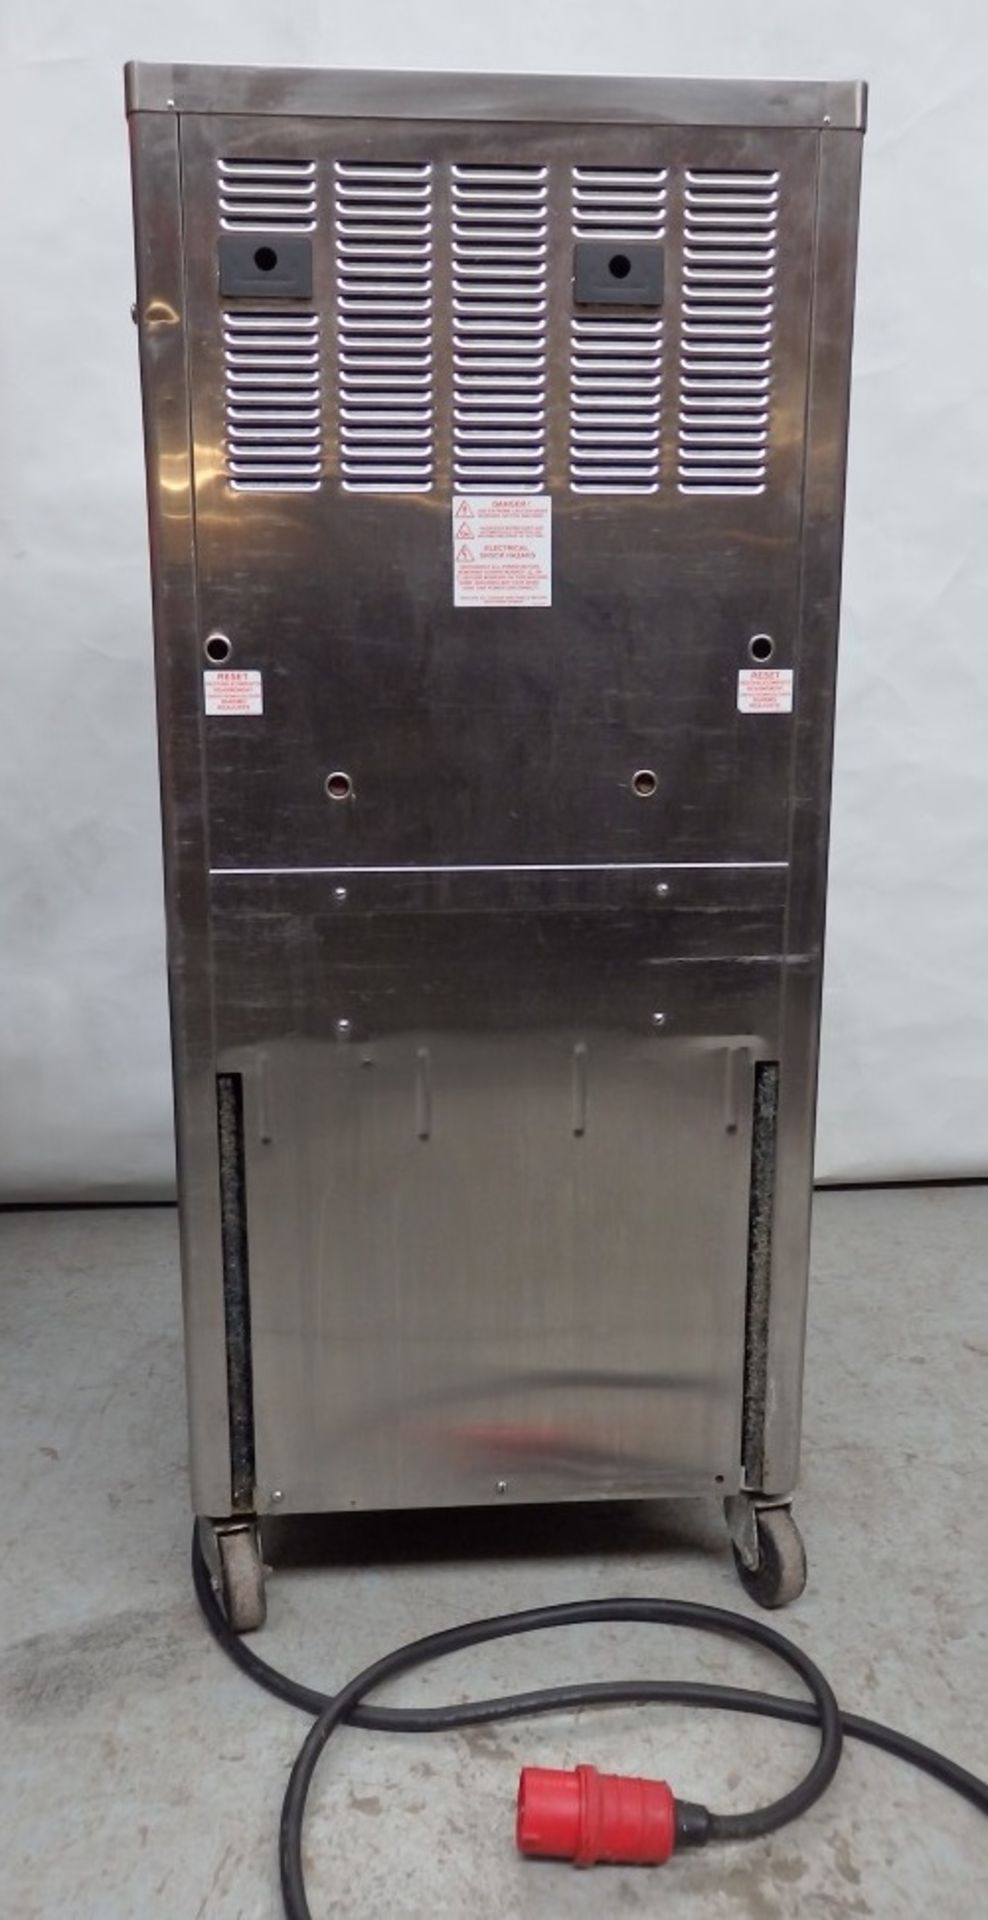 1 x Taylor Combination Shake and Soft Serve Commercial Ice Cream Machine (Model: C606)- - Image 21 of 21